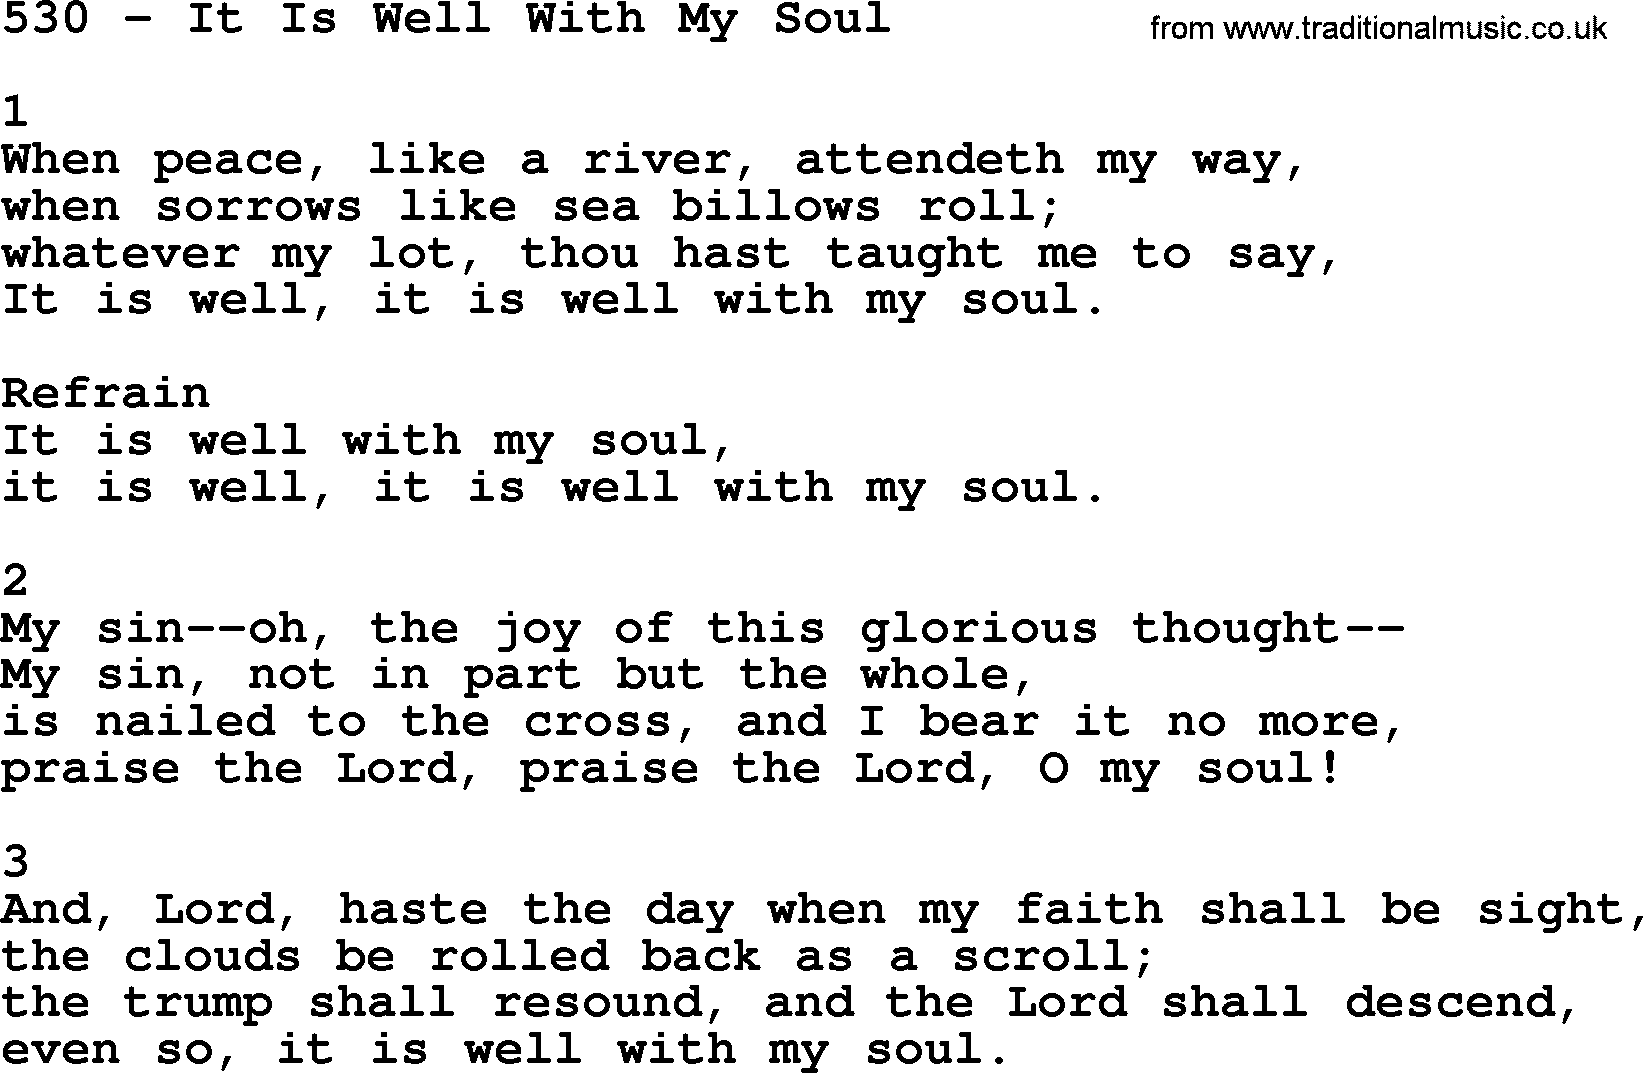 Complete Adventis Hymnal, title: 530-It Is Well With My Soul, with lyrics, midi, mp3, powerpoints(PPT) and PDF,